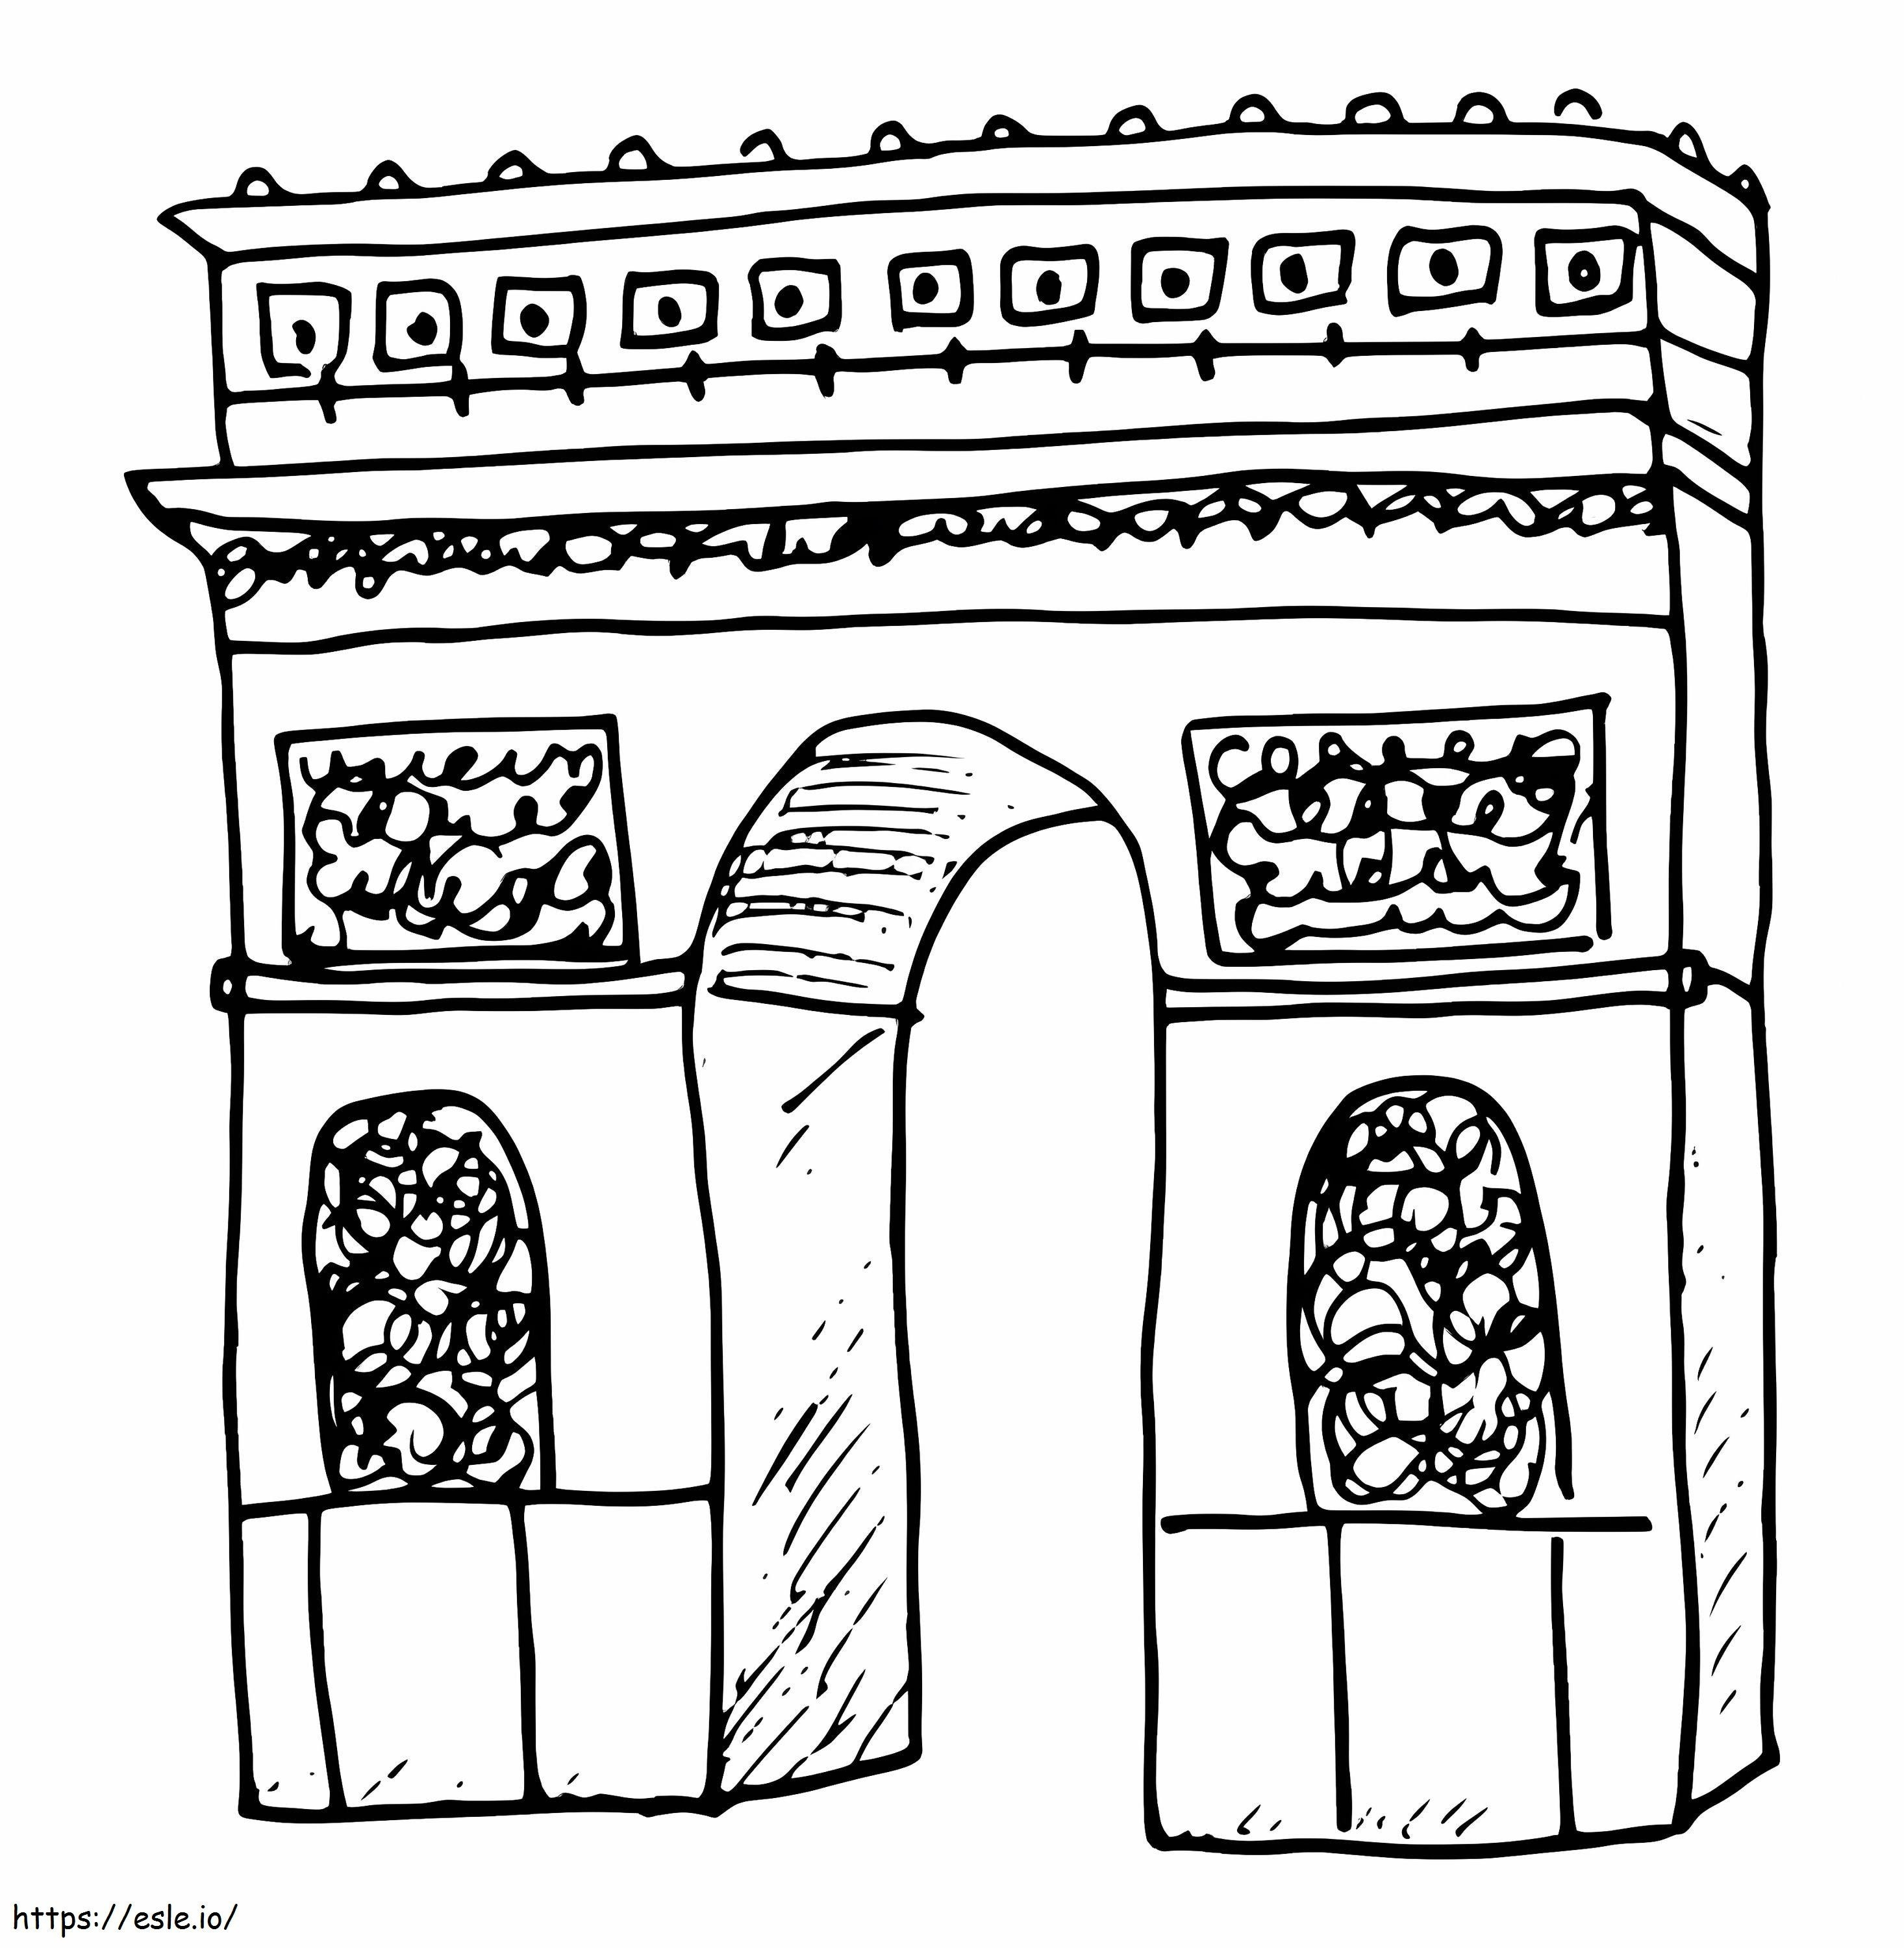 Arch Of Triumph 2 coloring page